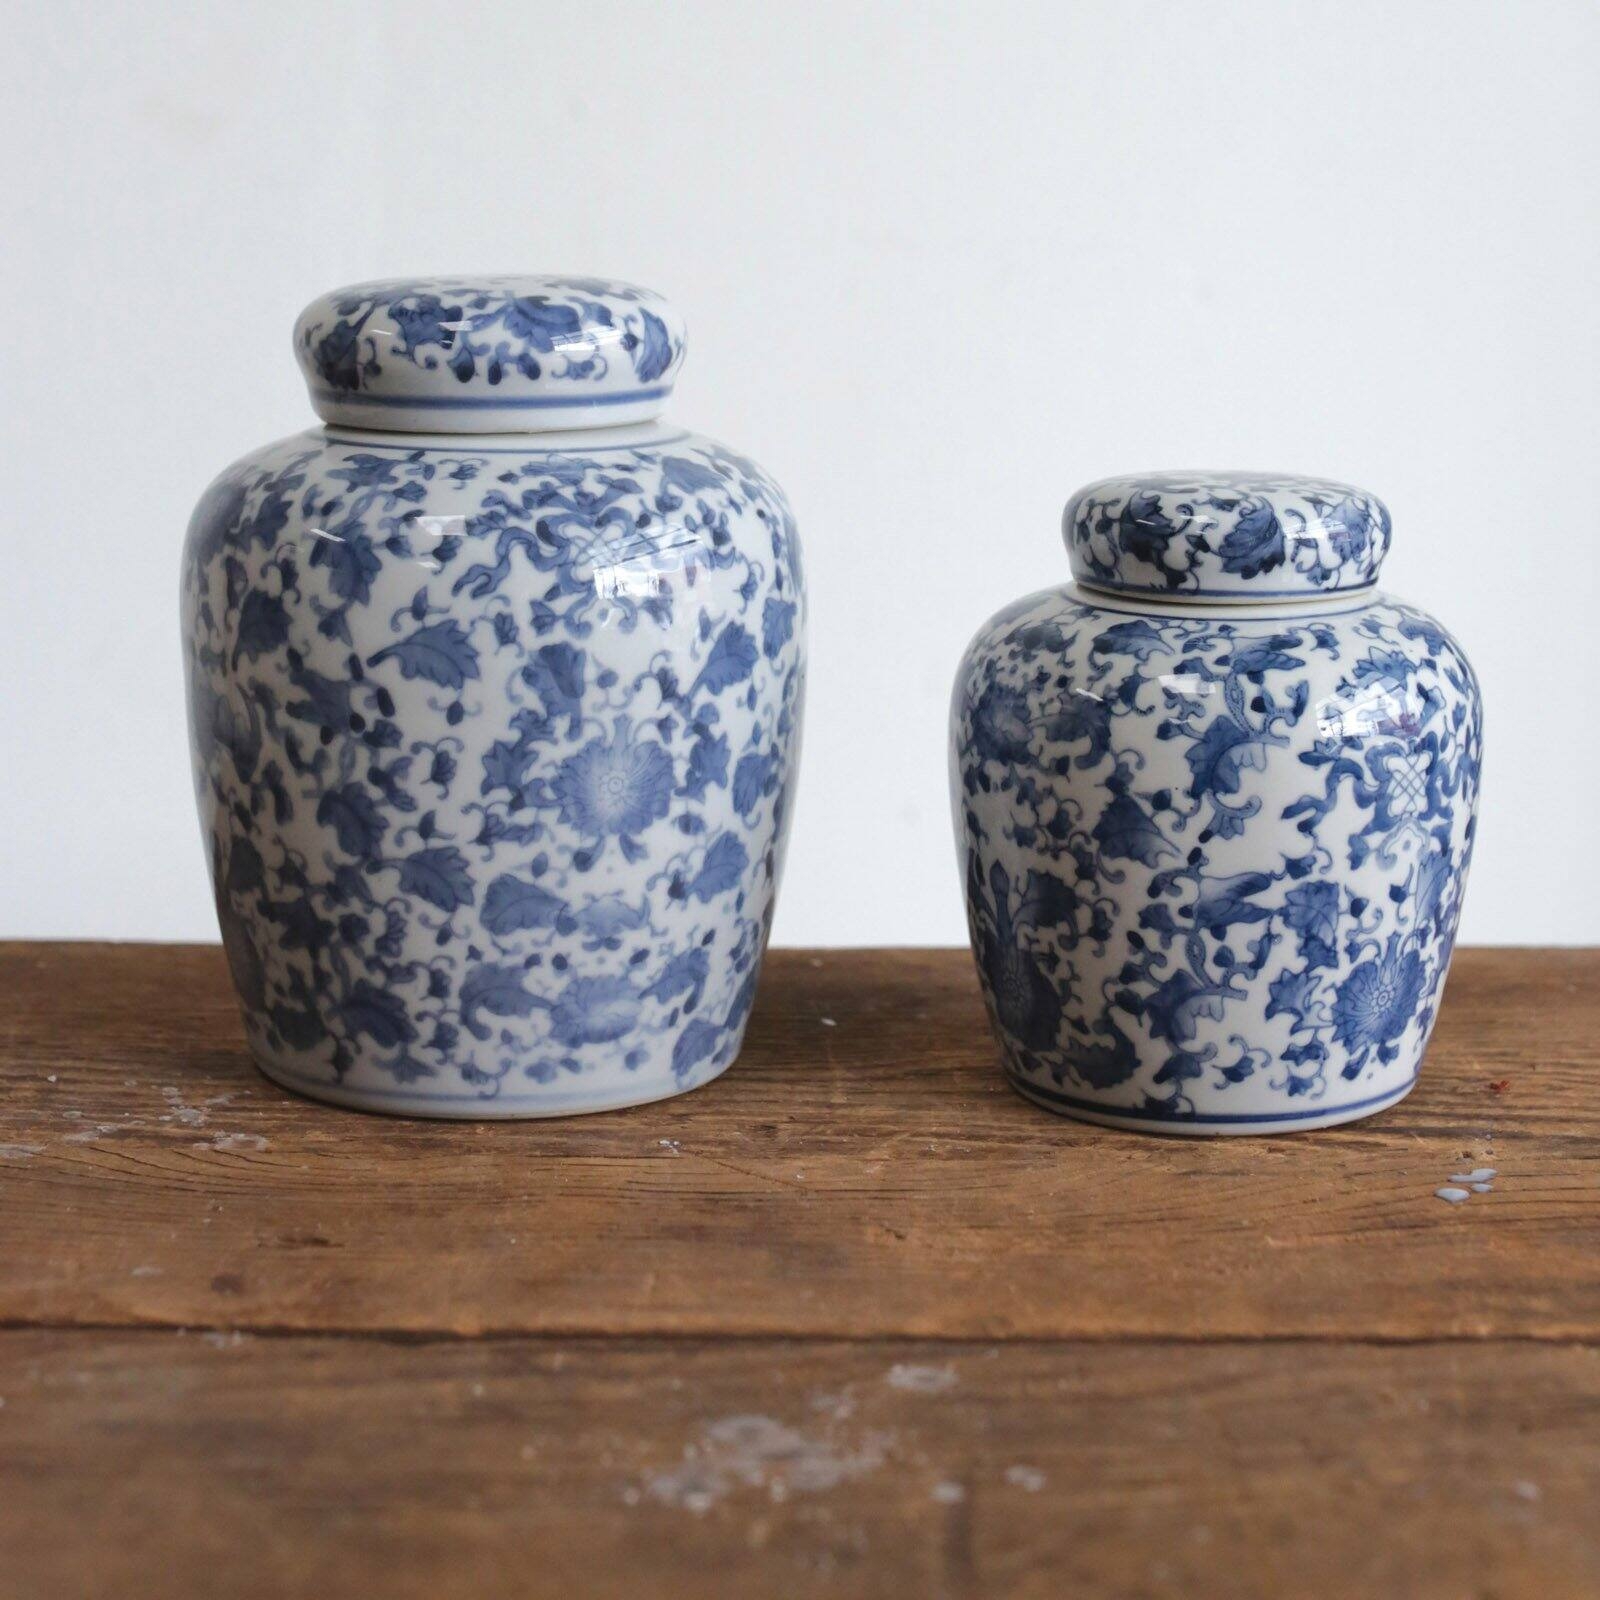 Decorative Blue and White Ceramic Ginger Jar with Lid - Image 2